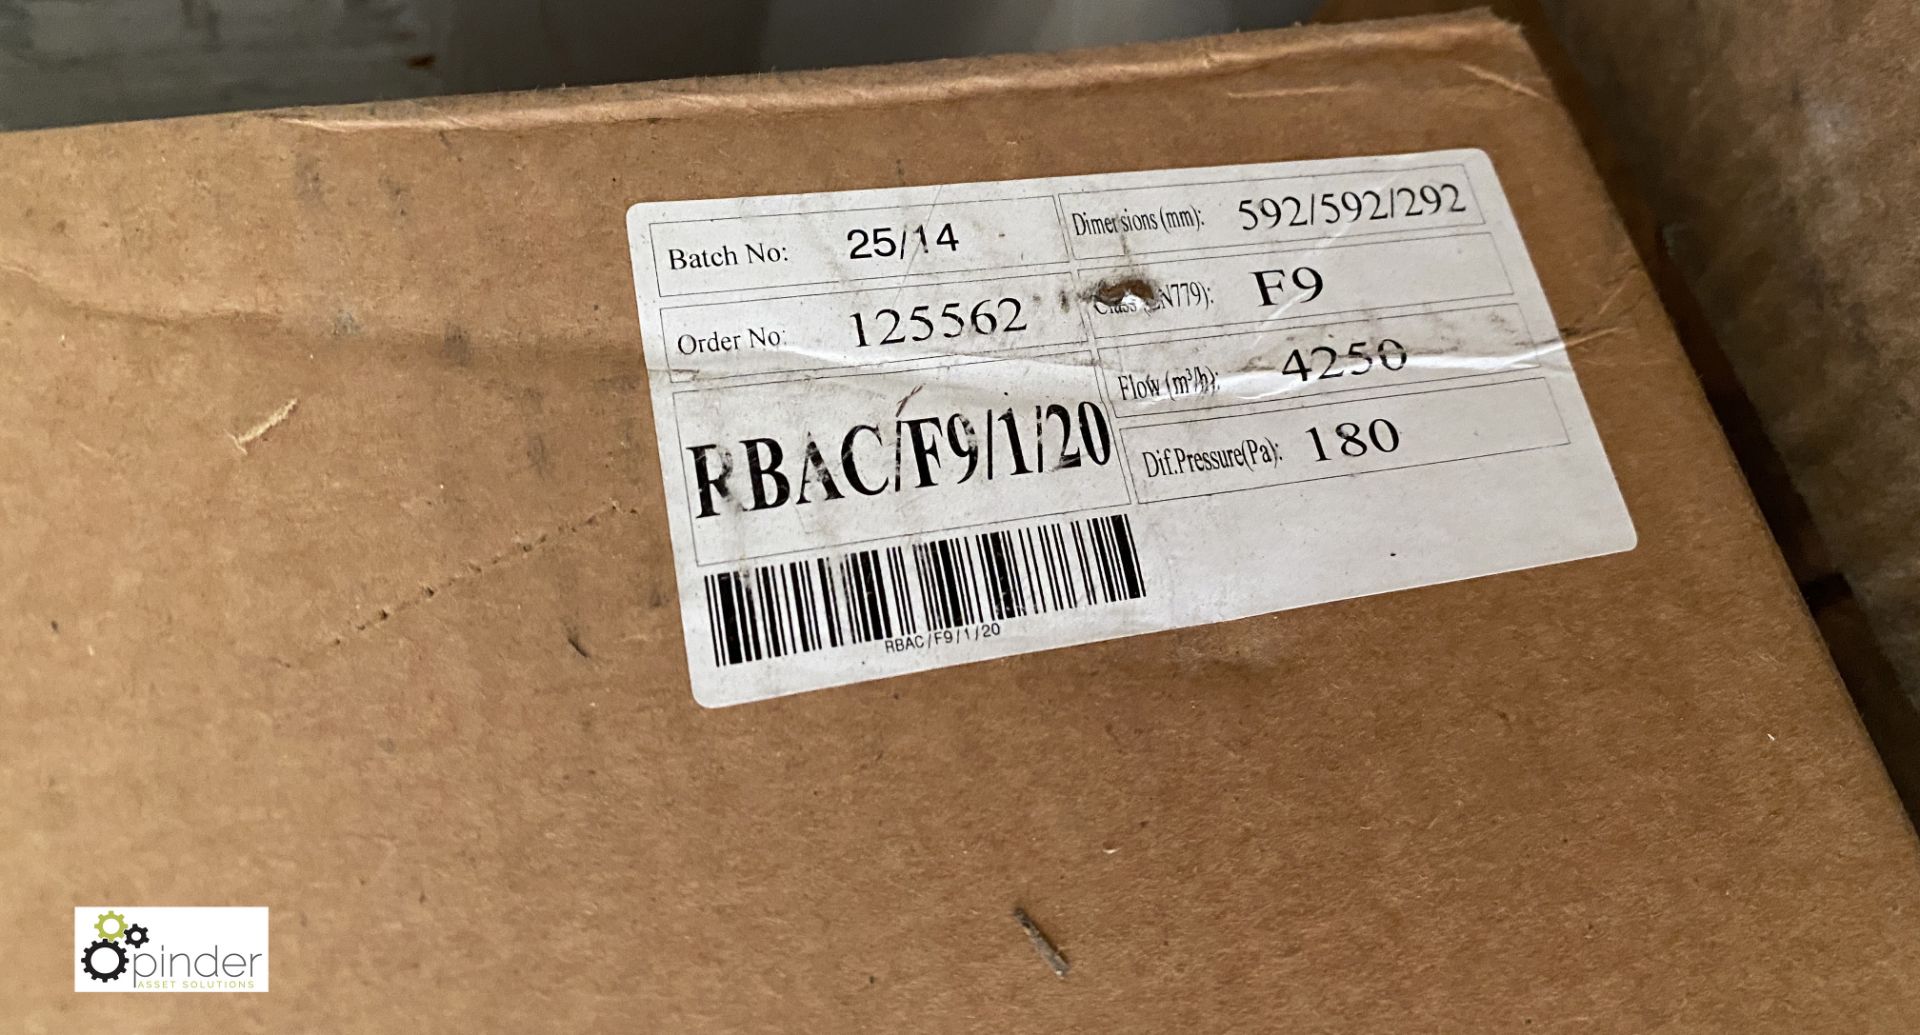 3 boxes RBAC/F9/1/20 Filters, 4250m³/h, dif pressure 180, size 592mm x 592mm x 292mm (container - Image 3 of 3